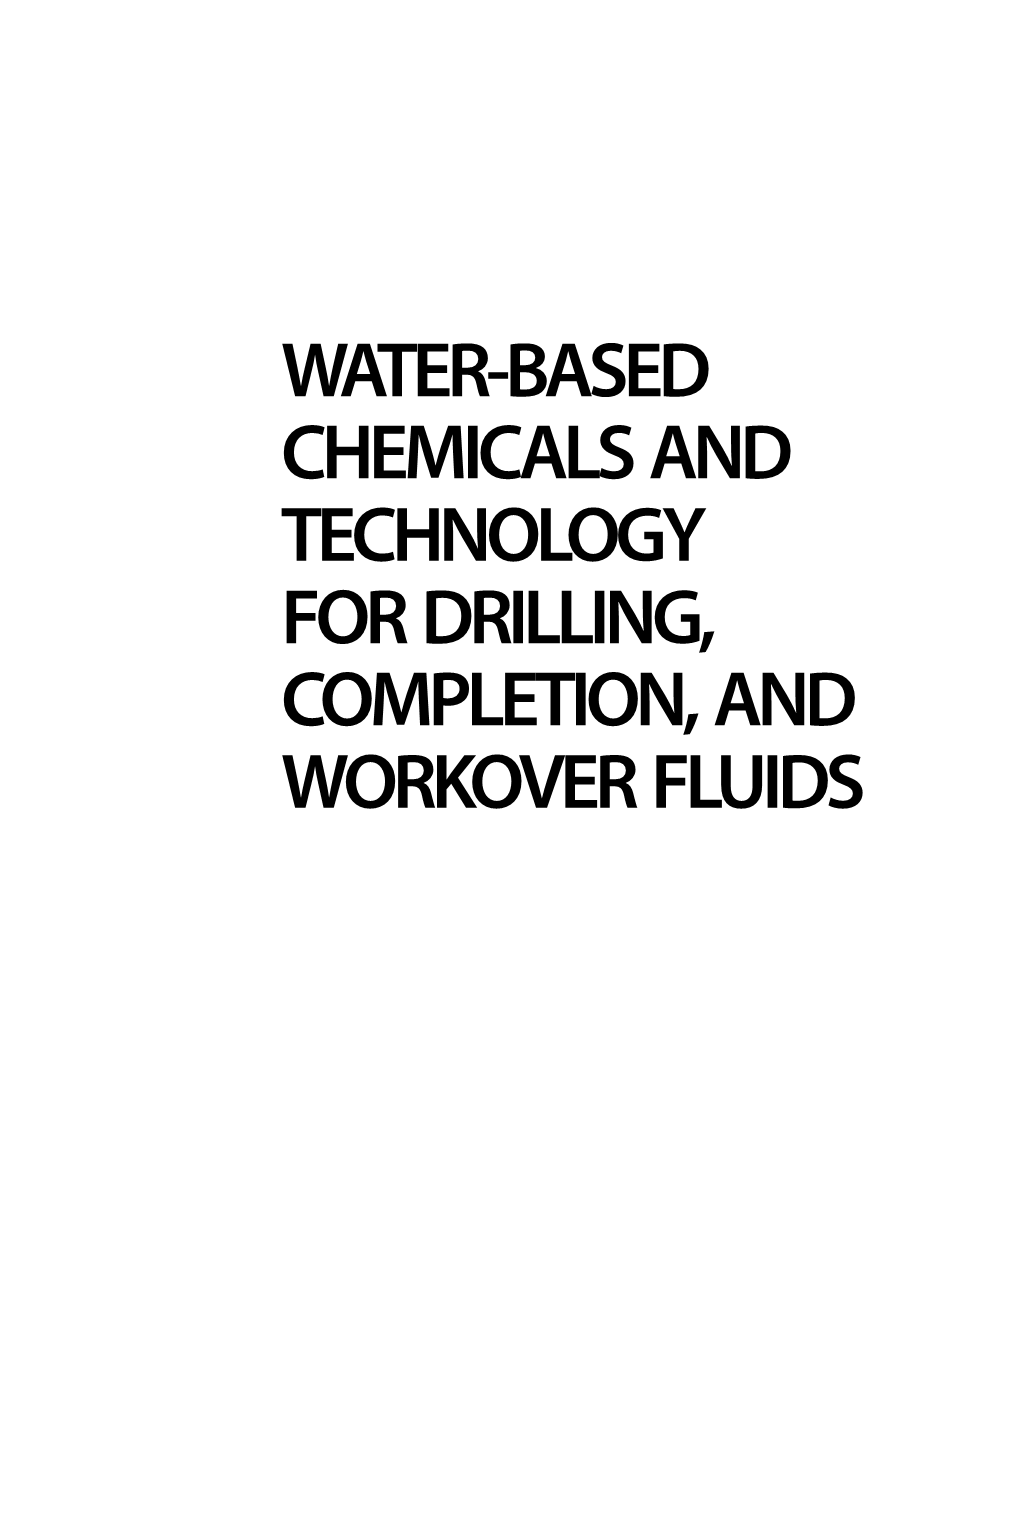 Water-Based Chemicals and Technology for Drilling, Completion, and Workover Fluids Water-Based Chemicals and Technology for Drilling, Completion, and Workover Fluids